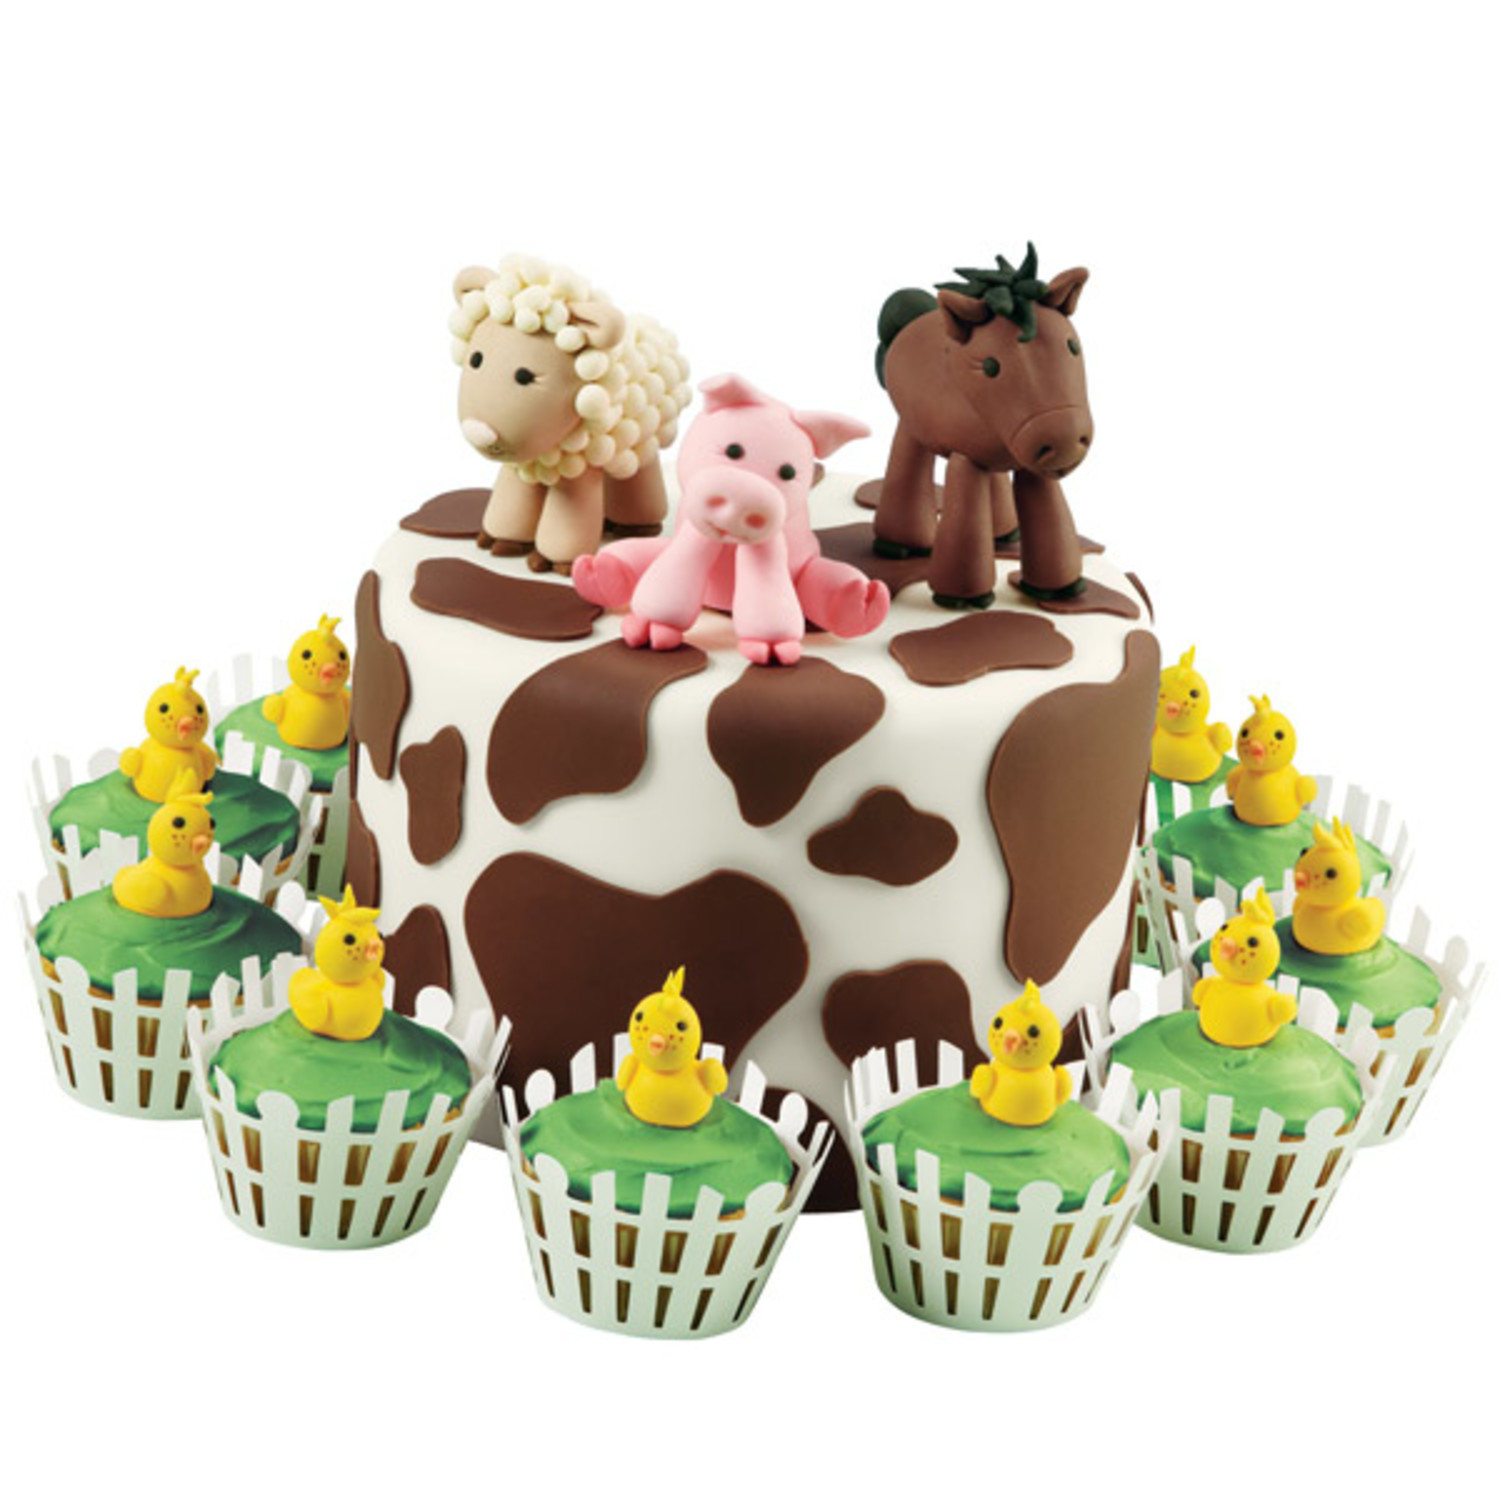 Friends on the Farm Cake & Cupcakes